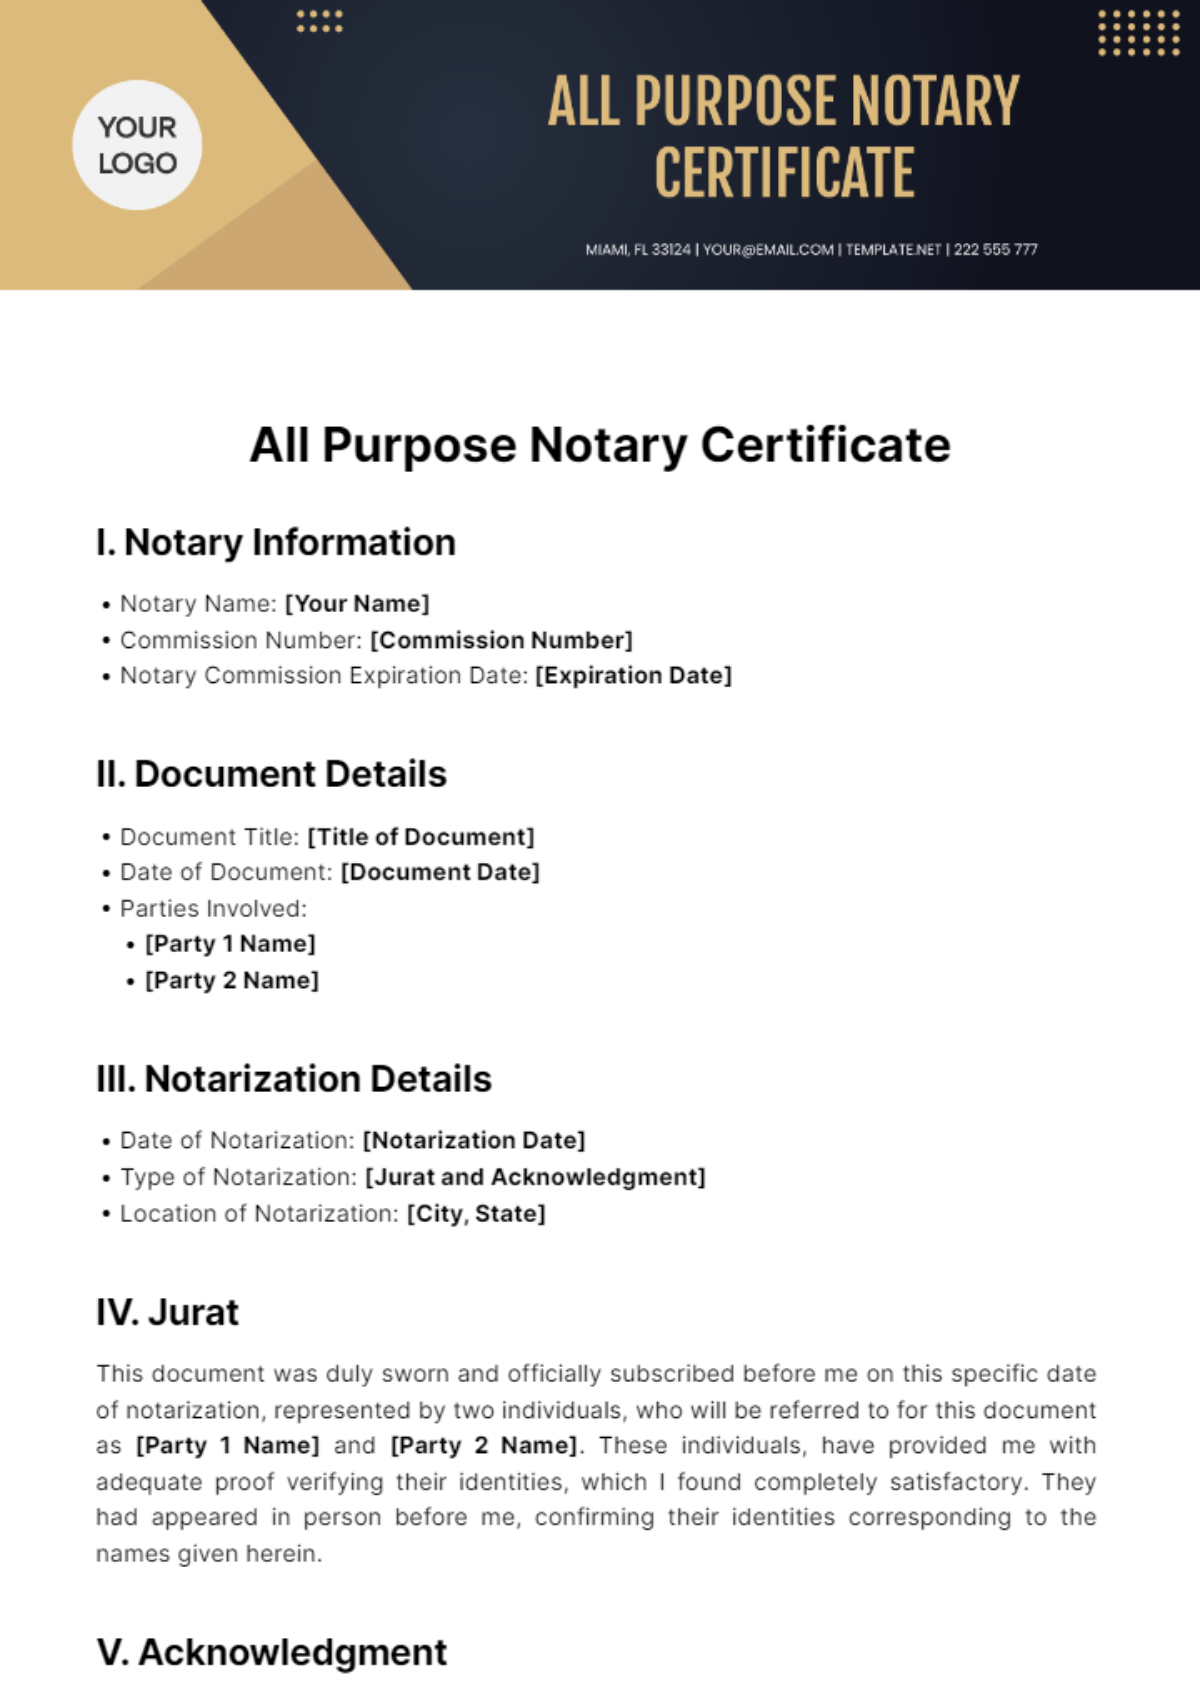 All Purpose Notary Certificate Template